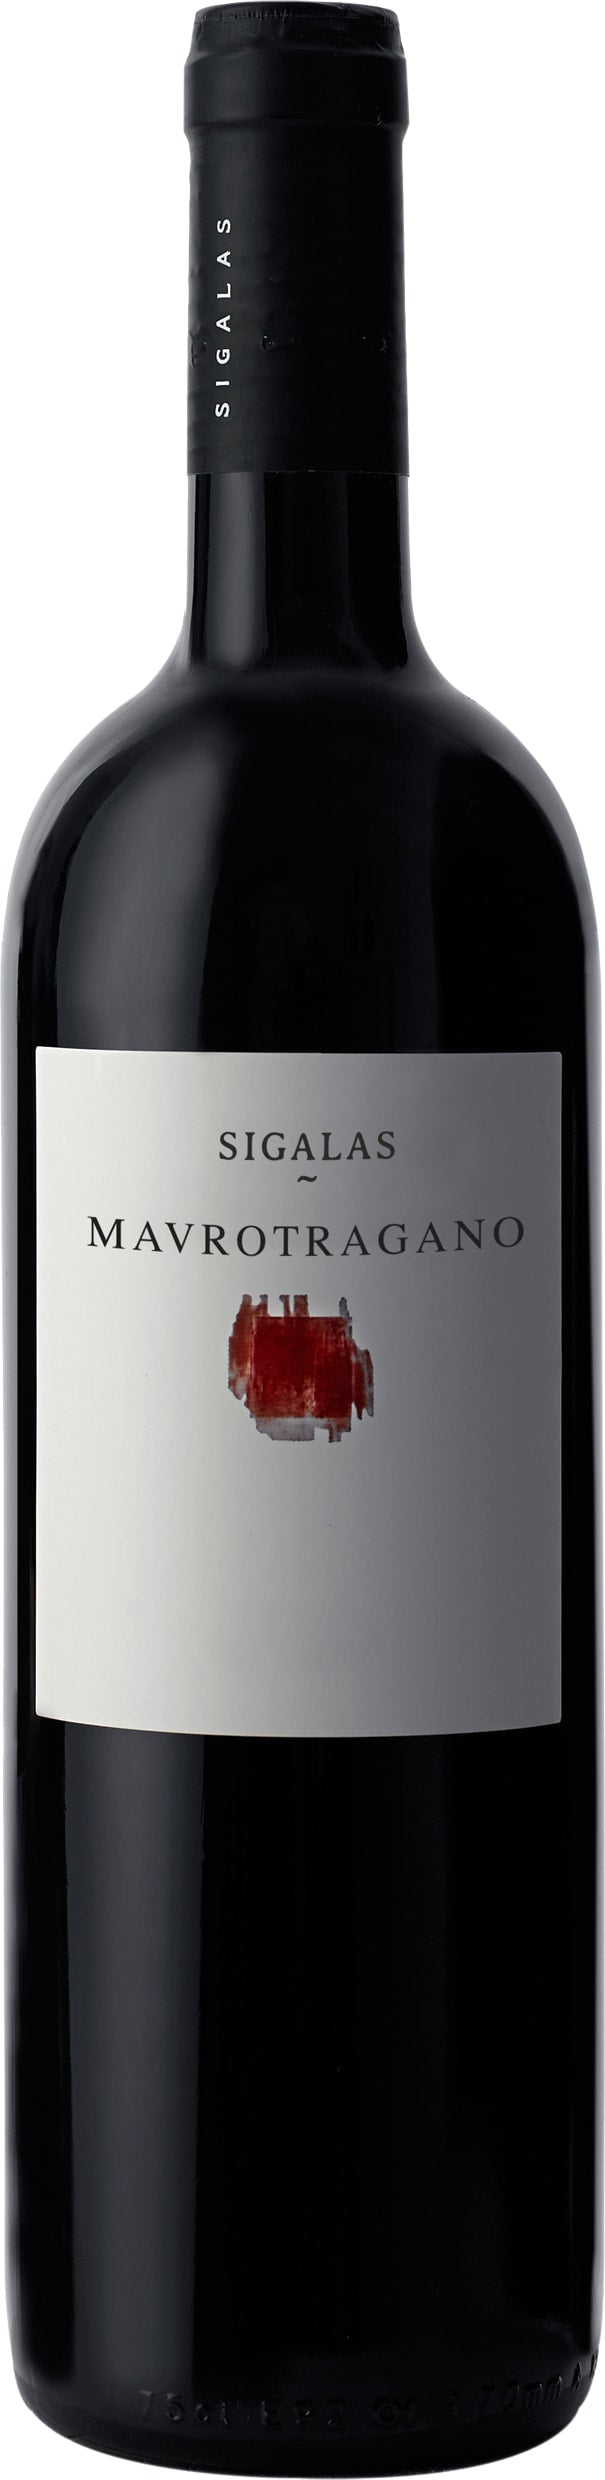 Sigalas Mavrotragano 2021 75cl - Buy Sigalas Wines from GREAT WINES DIRECT wine shop